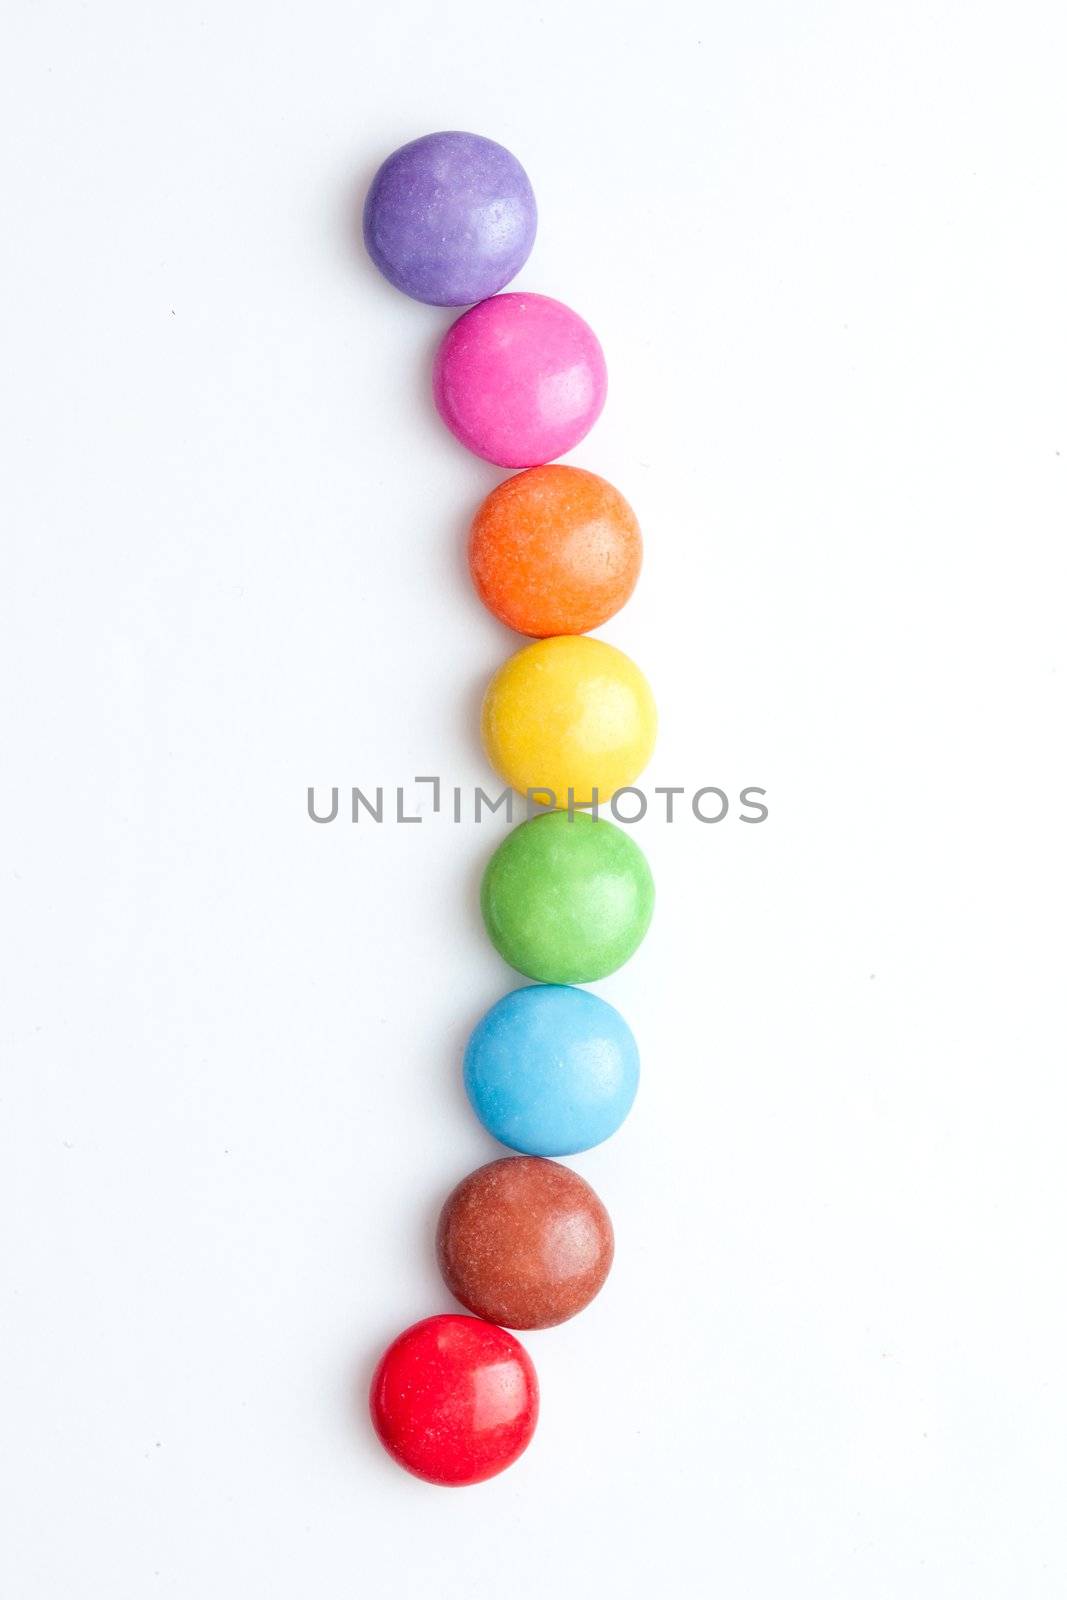 Chocolate candies in a line against a white background